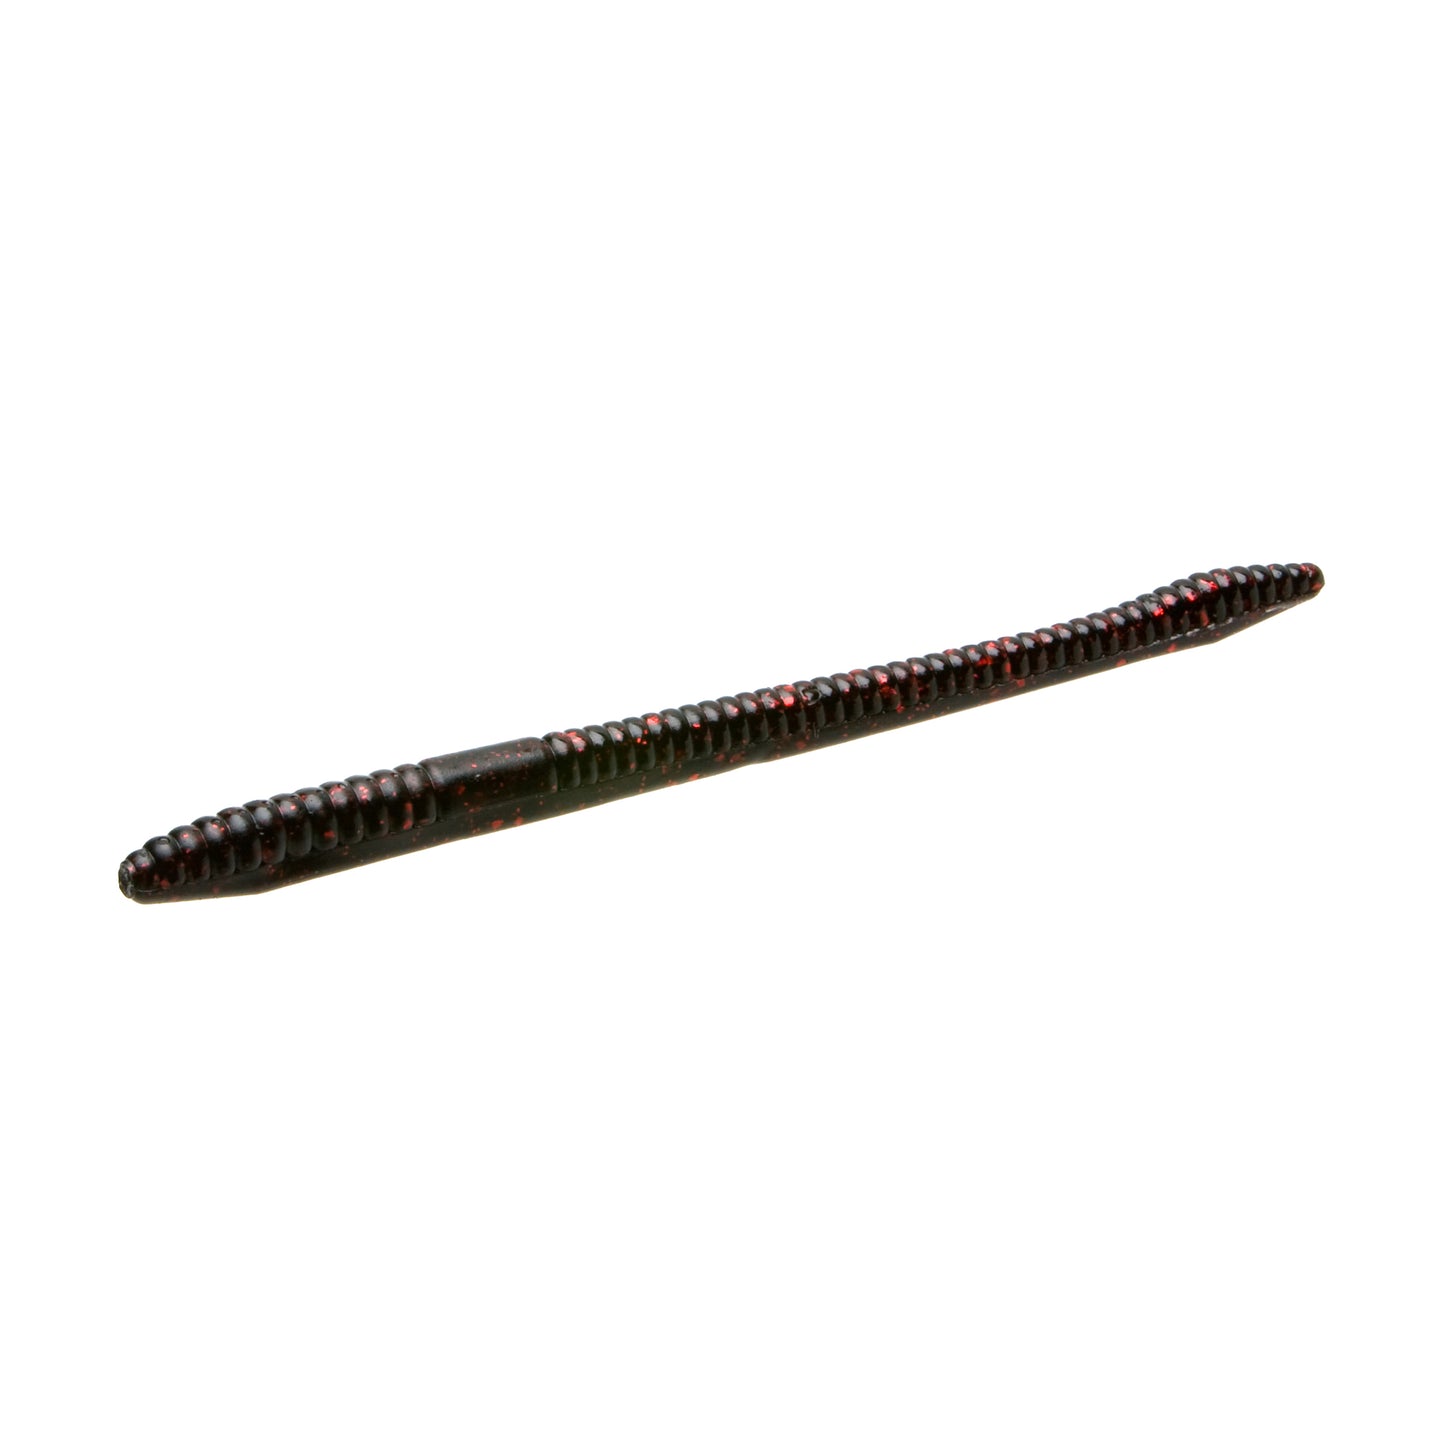 Zoom Finesse 4.5" Worm